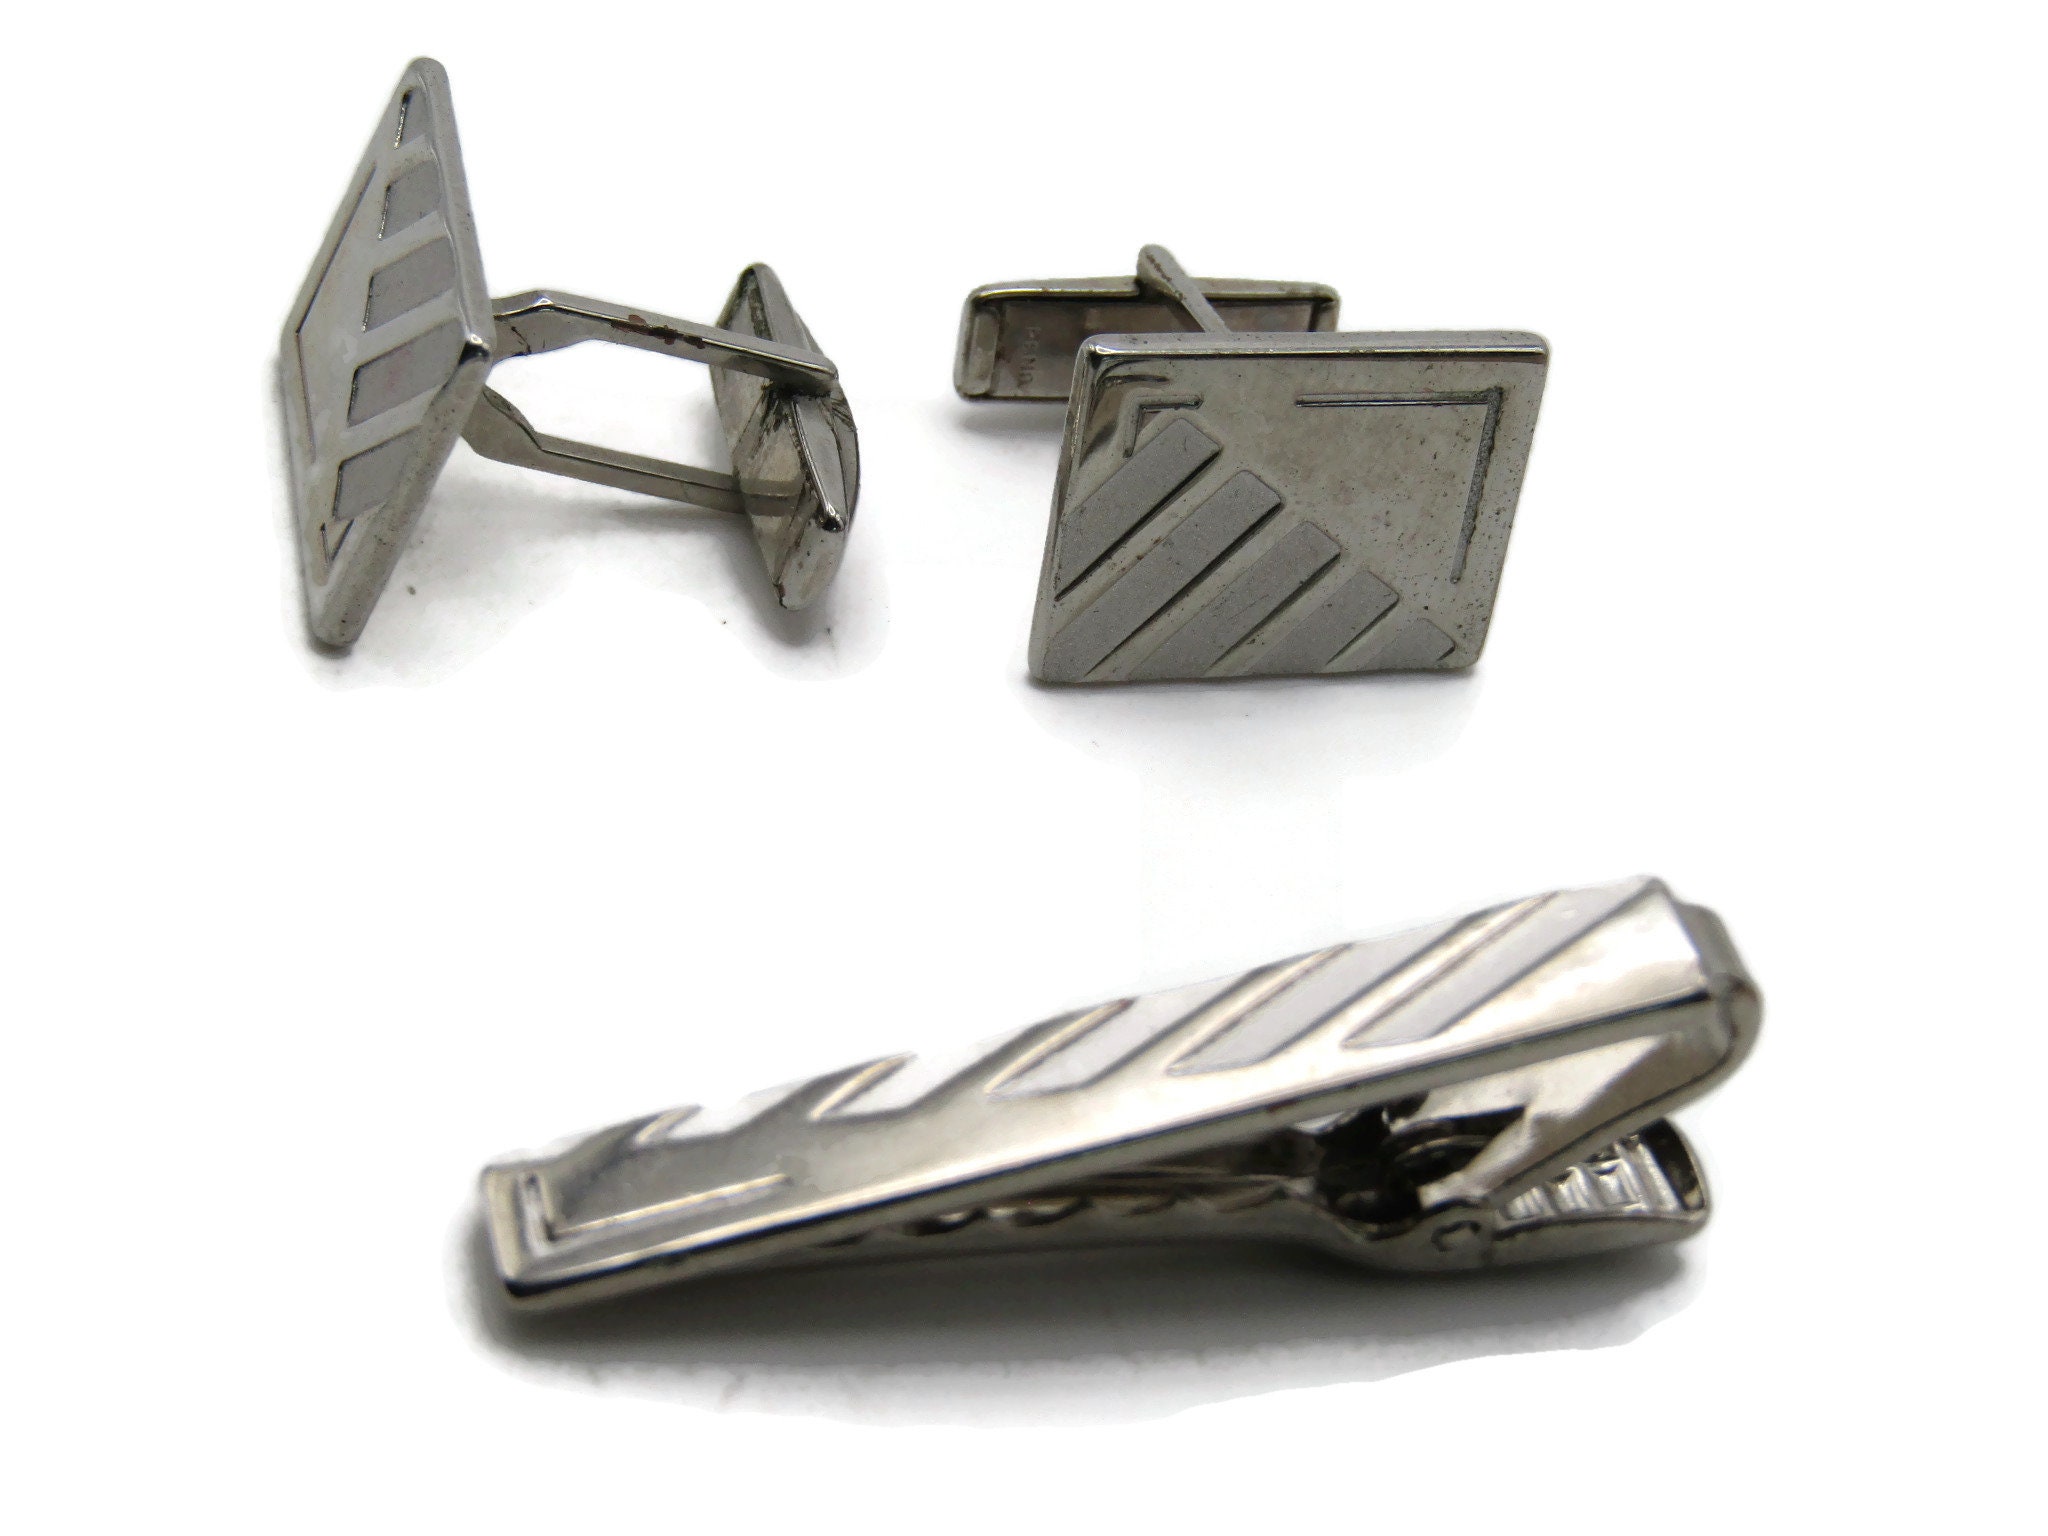 Diagonal Lines Silver Cufflink And Tie Bar Set, Gifts For Men